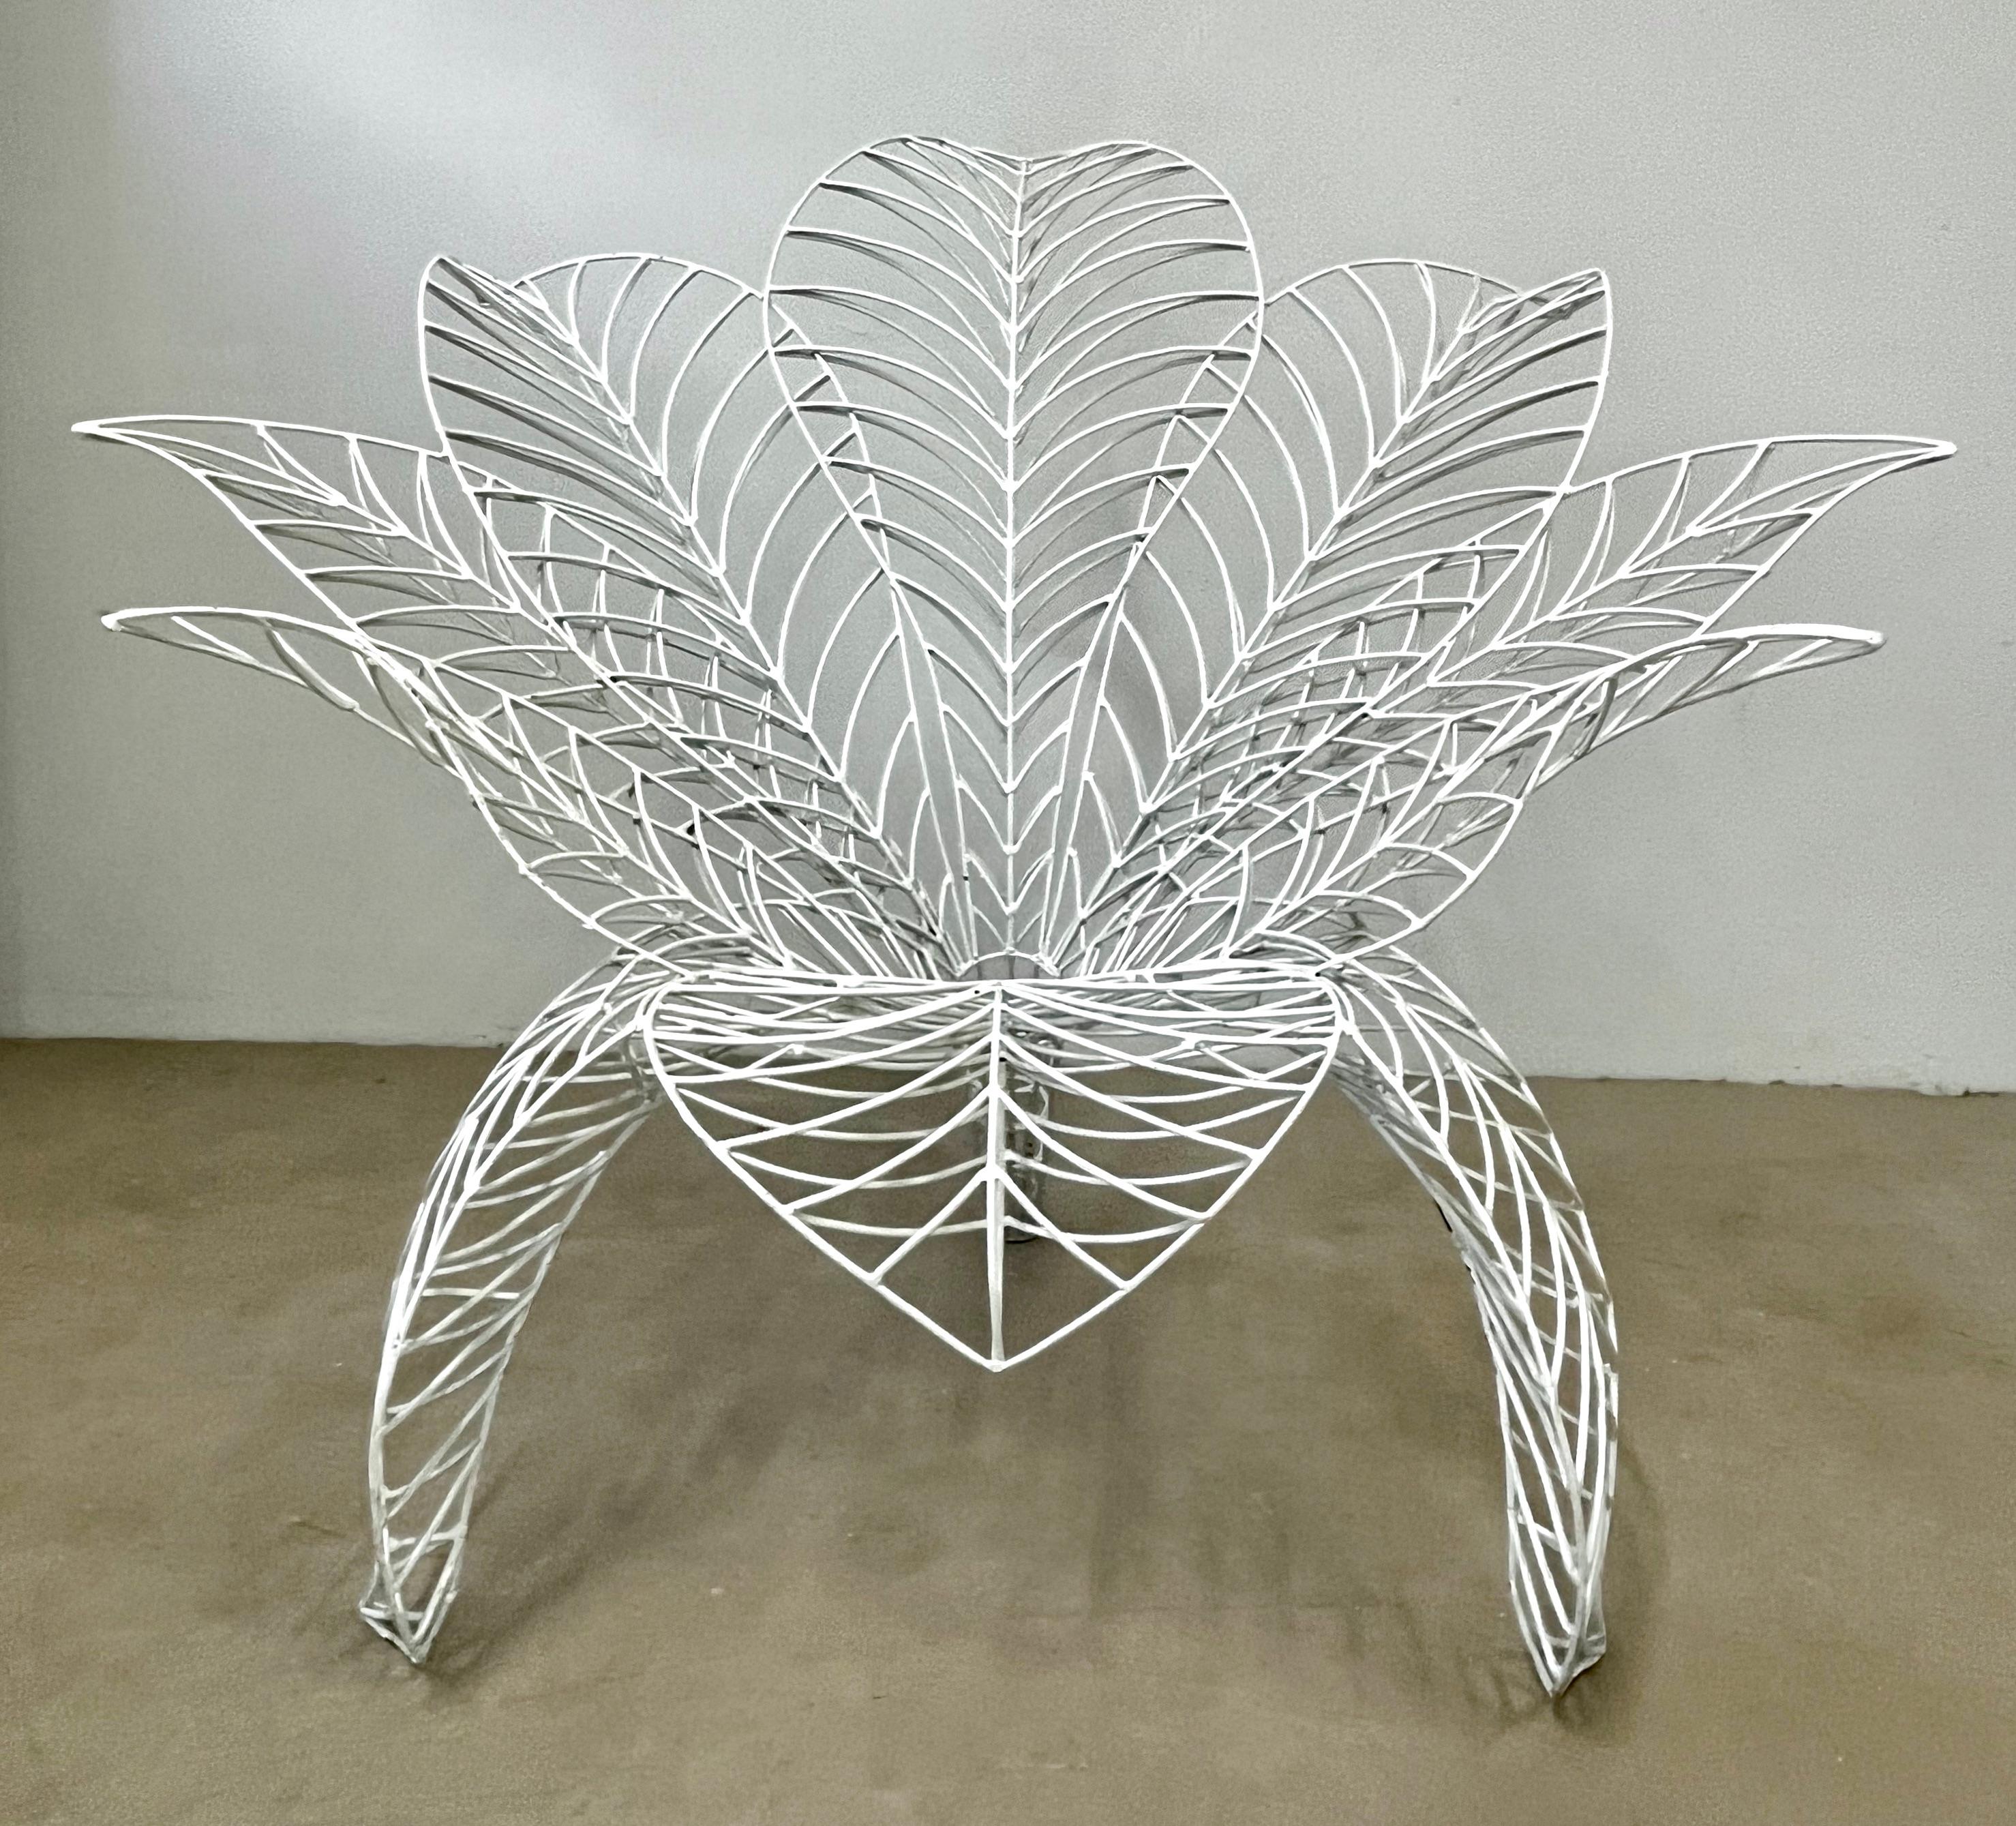 Fun minimalist armchair, a unique organic modern design inspired by nature, manufactured and signed by the Italian artist, Anacleto Spazzapan (Luino, Italy - 1943). The handmade structure in the shape of a blossoming flower is made of hand-welded